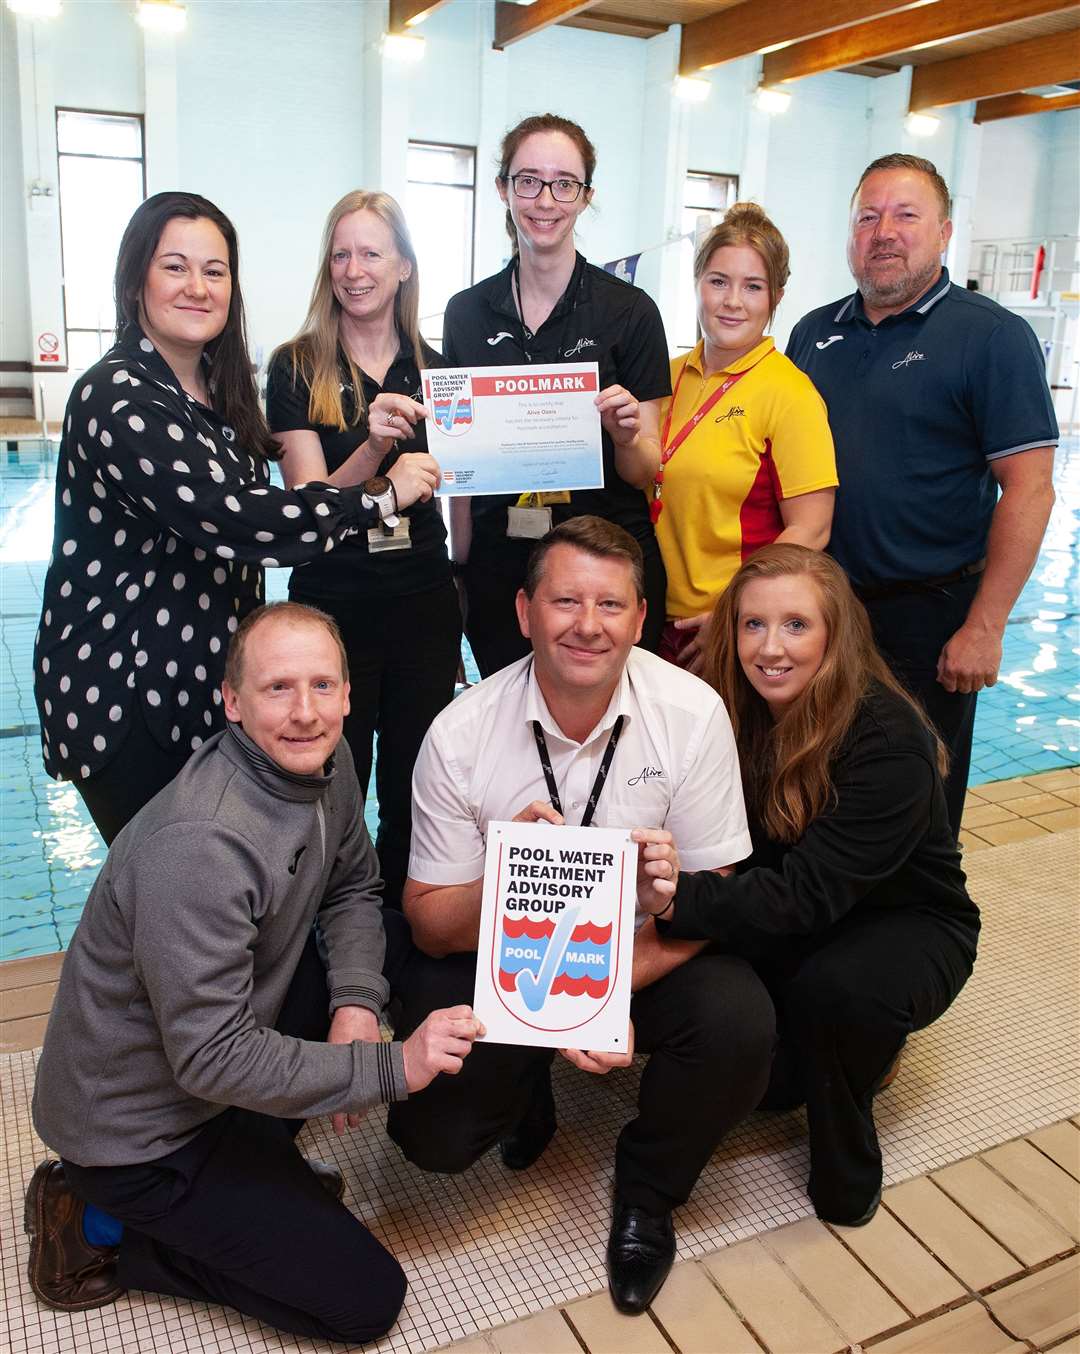 Pictured are Neil Gromett, Dave Cleland, Louise Biggs, Siobhan Cleeve, Jon Bunting, Mair Morton, Cathryn Hancock and Molly Gromett at St James Swimming Pool